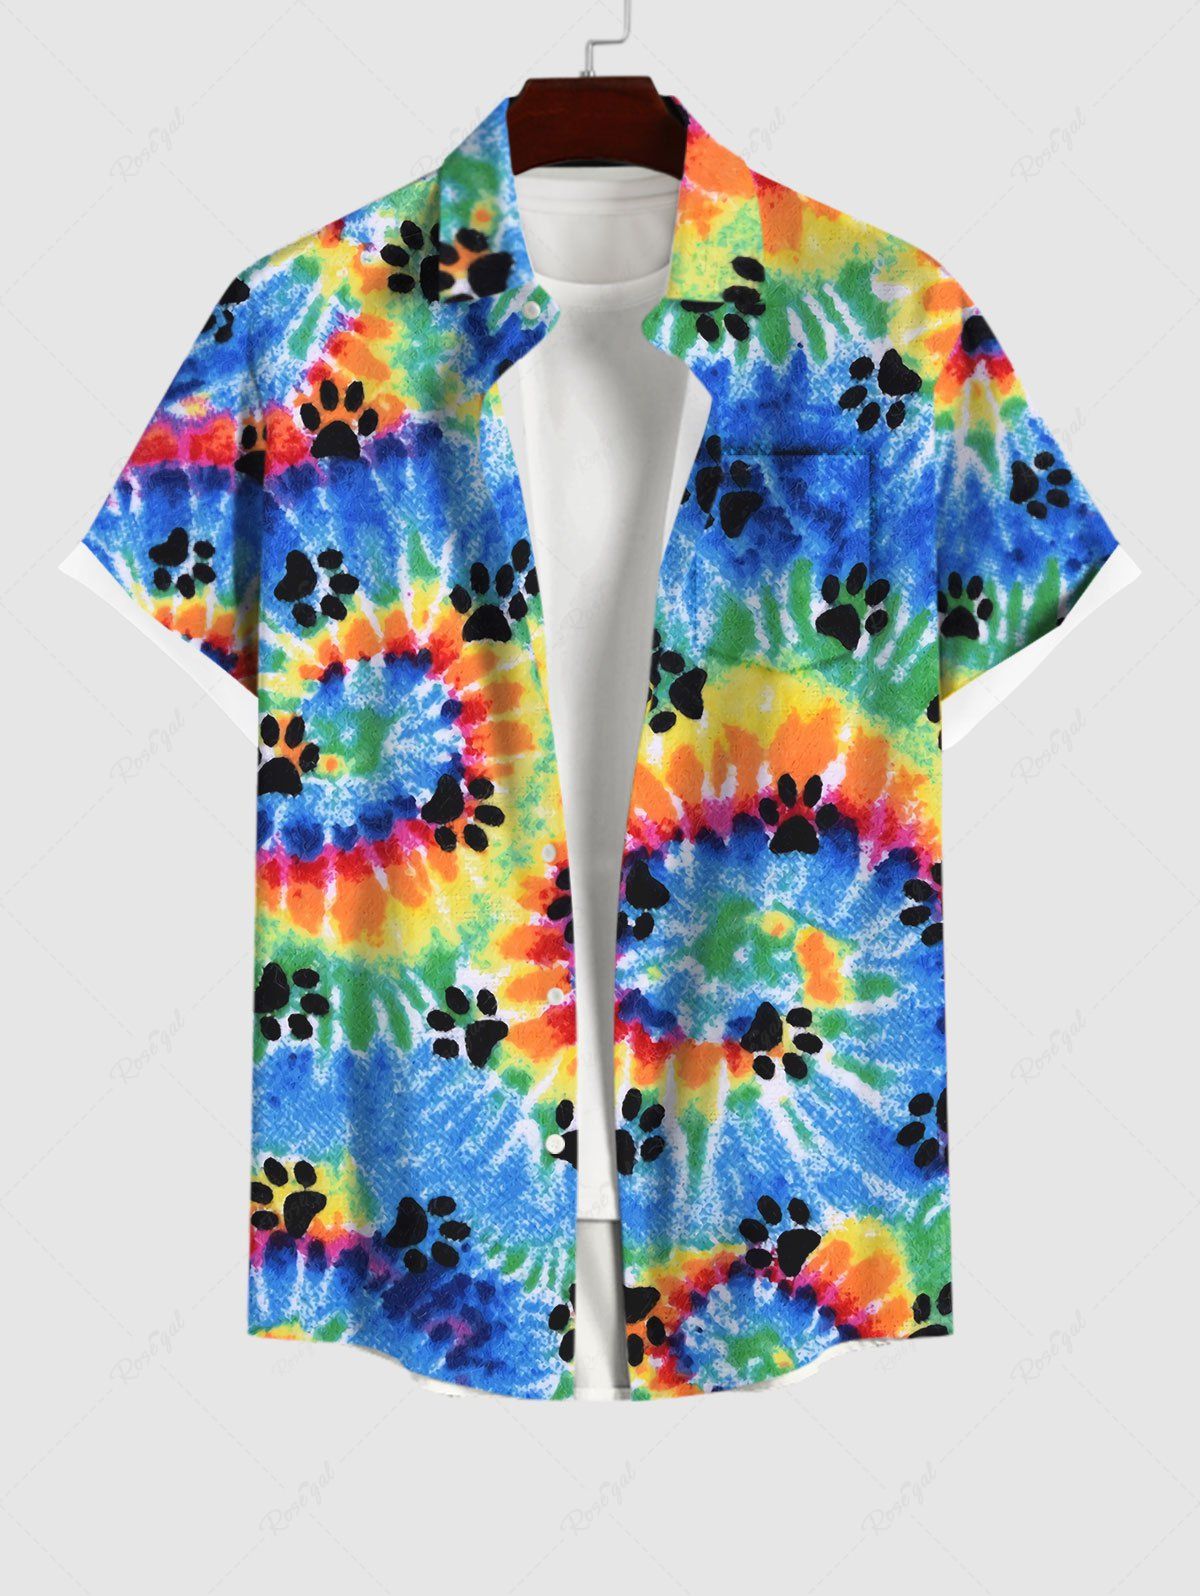 Hawaii Plus Size Turn-down Collar Spiral Watercolor Tie Dye Cat Paw Print Buttons Pocket Beach Shirt For Men Multi-A L